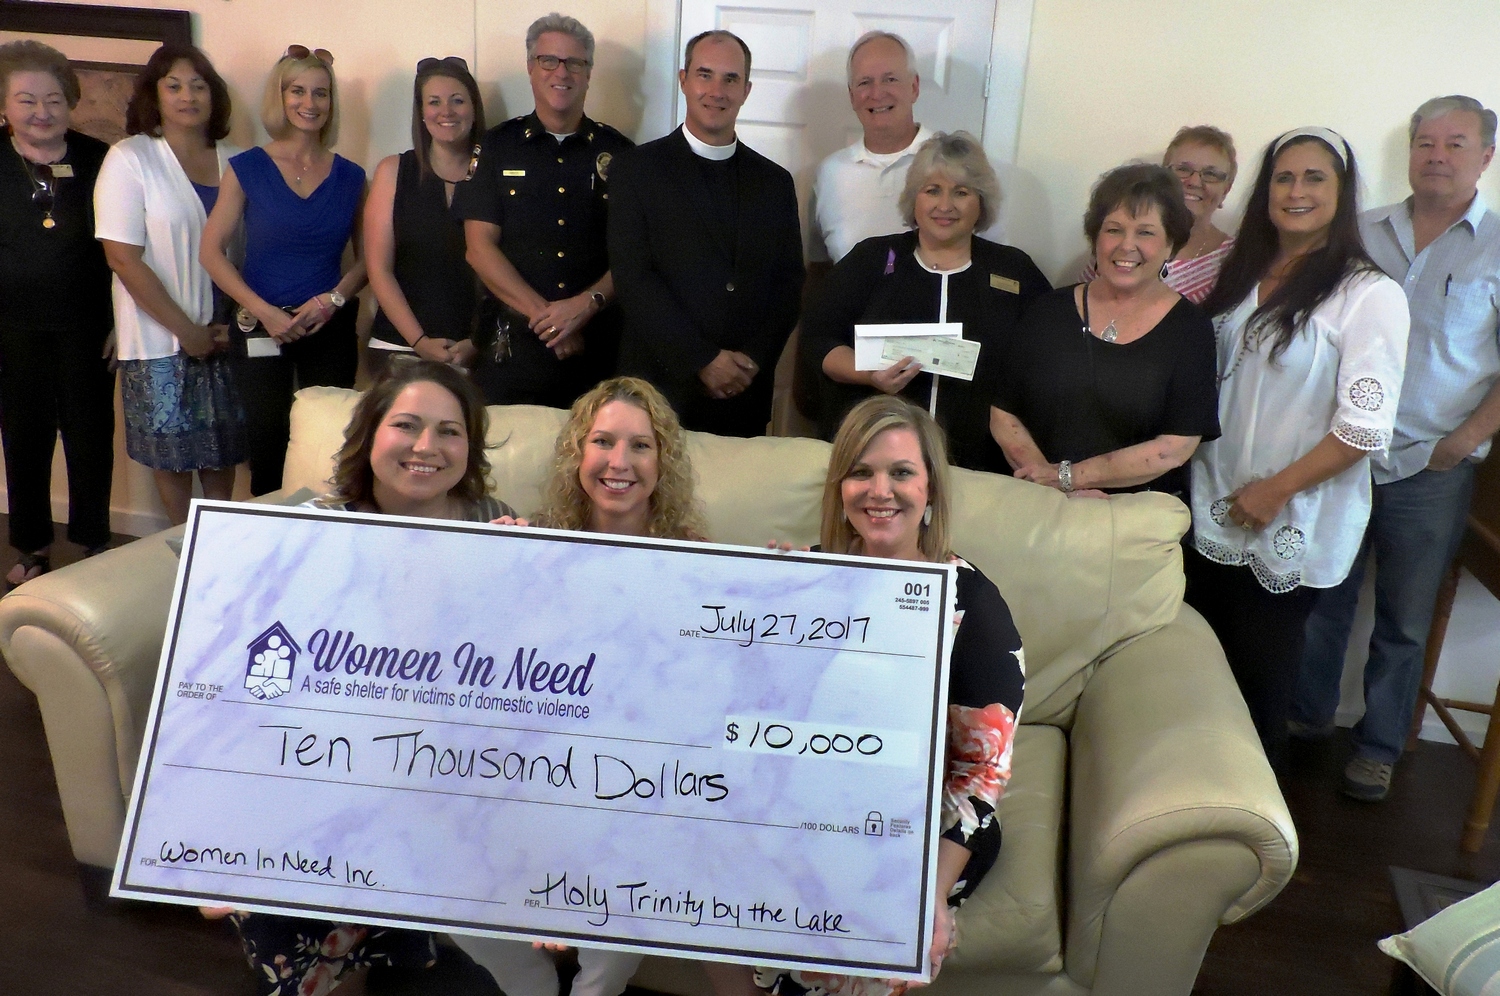 Holy Trinity Church Outreach Committee shows support to Women In Need